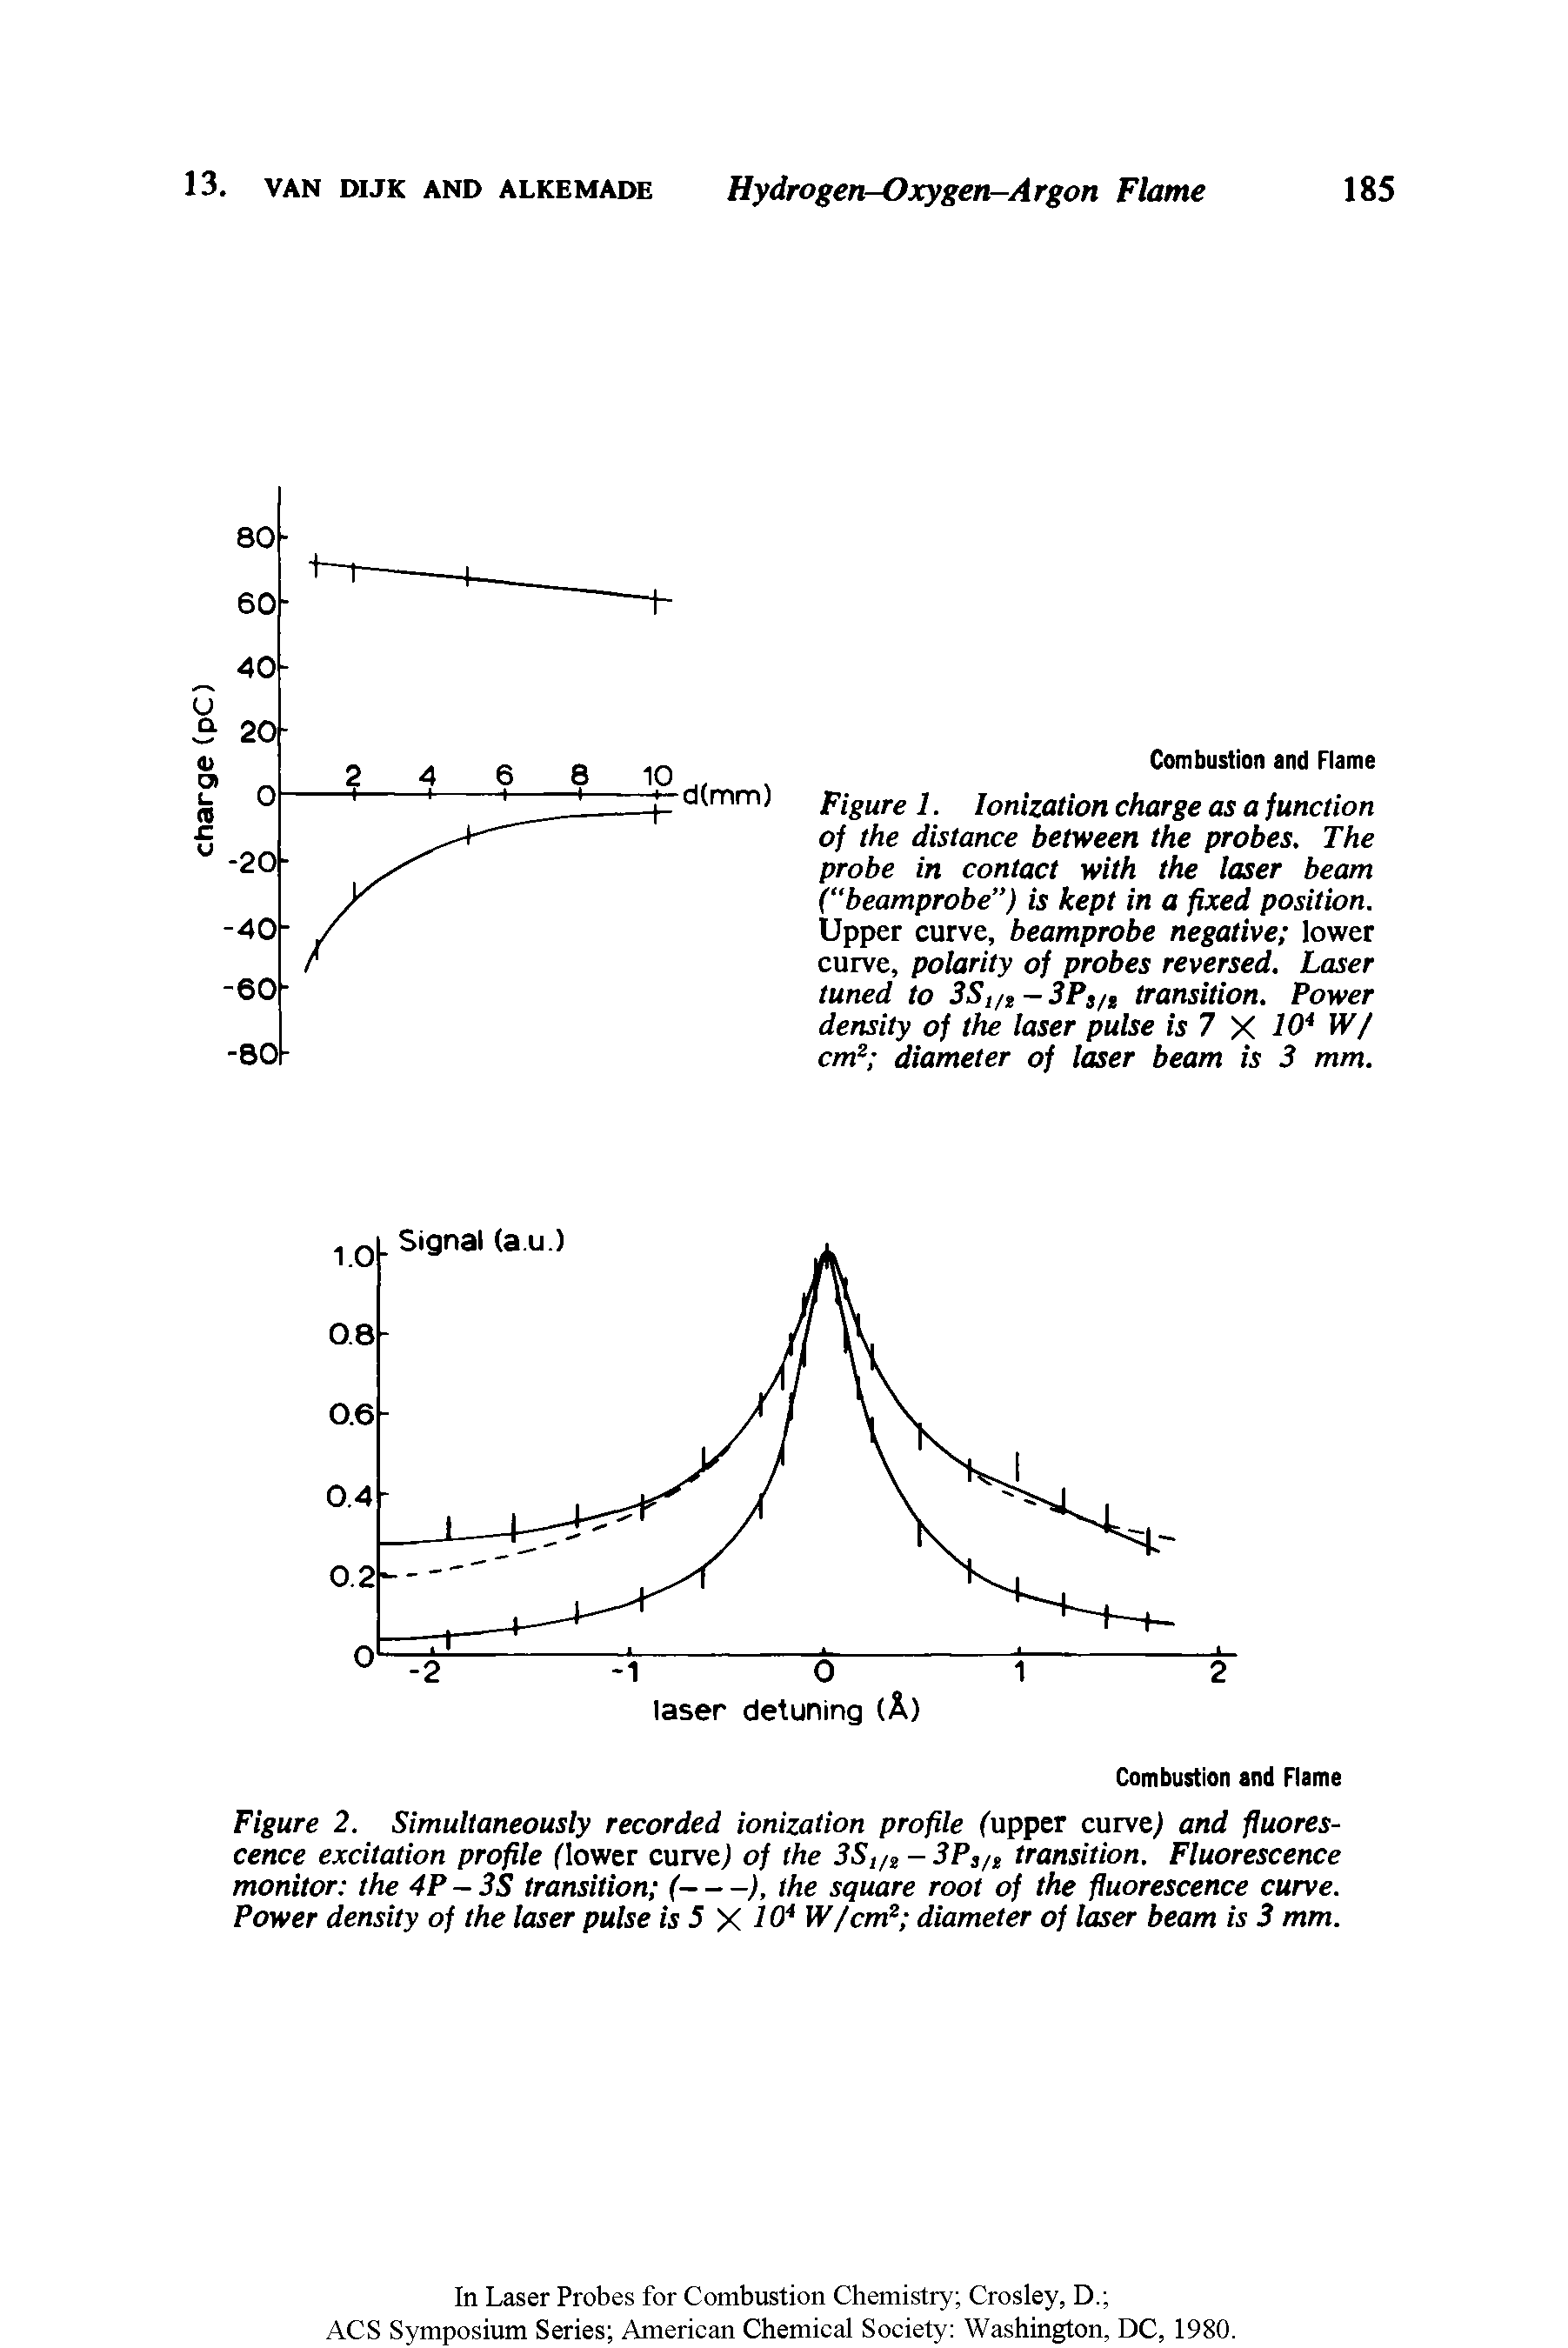 Figure 1. Ionization charge as a function of the distance between the probes. The probe in contact with the laser beam ("beamprobe") is kept in a fixed position. Upper curve, beamprobe negative lower curve, polarity of probes reversed. Laser tuned to 3Sl/lt - 3P /t transition. Power density of the laser pulse is 7 X 10 W/ cm2 diameter of laser beam is 3 mm.